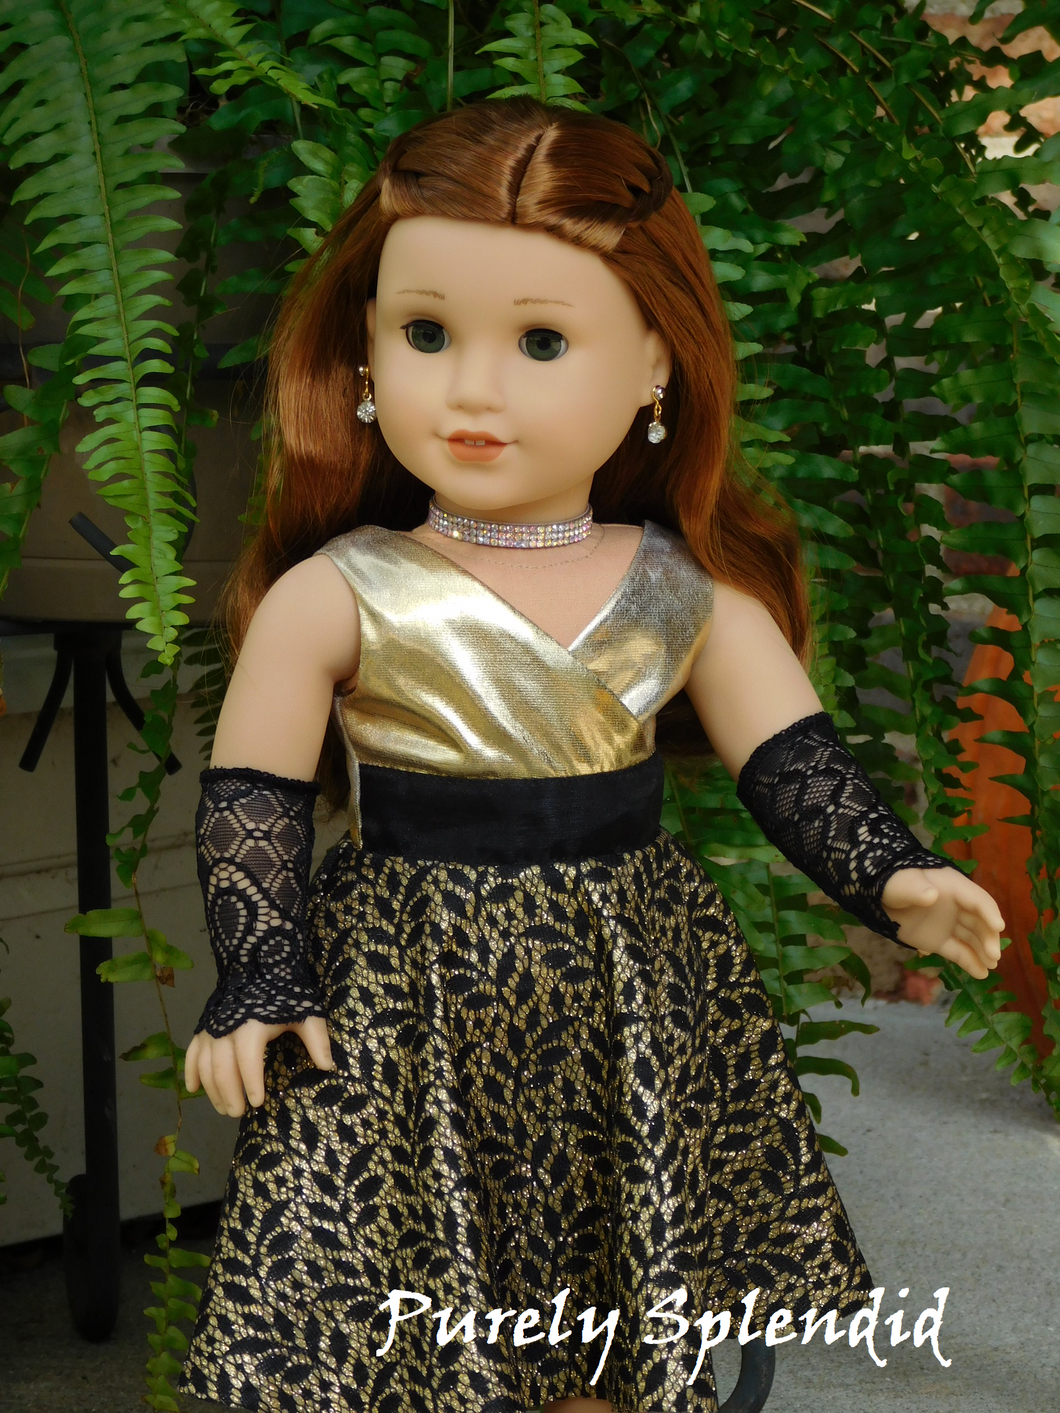 18 inch doll shown wearing the Sparkling Aurora Borealis Choker Necklace